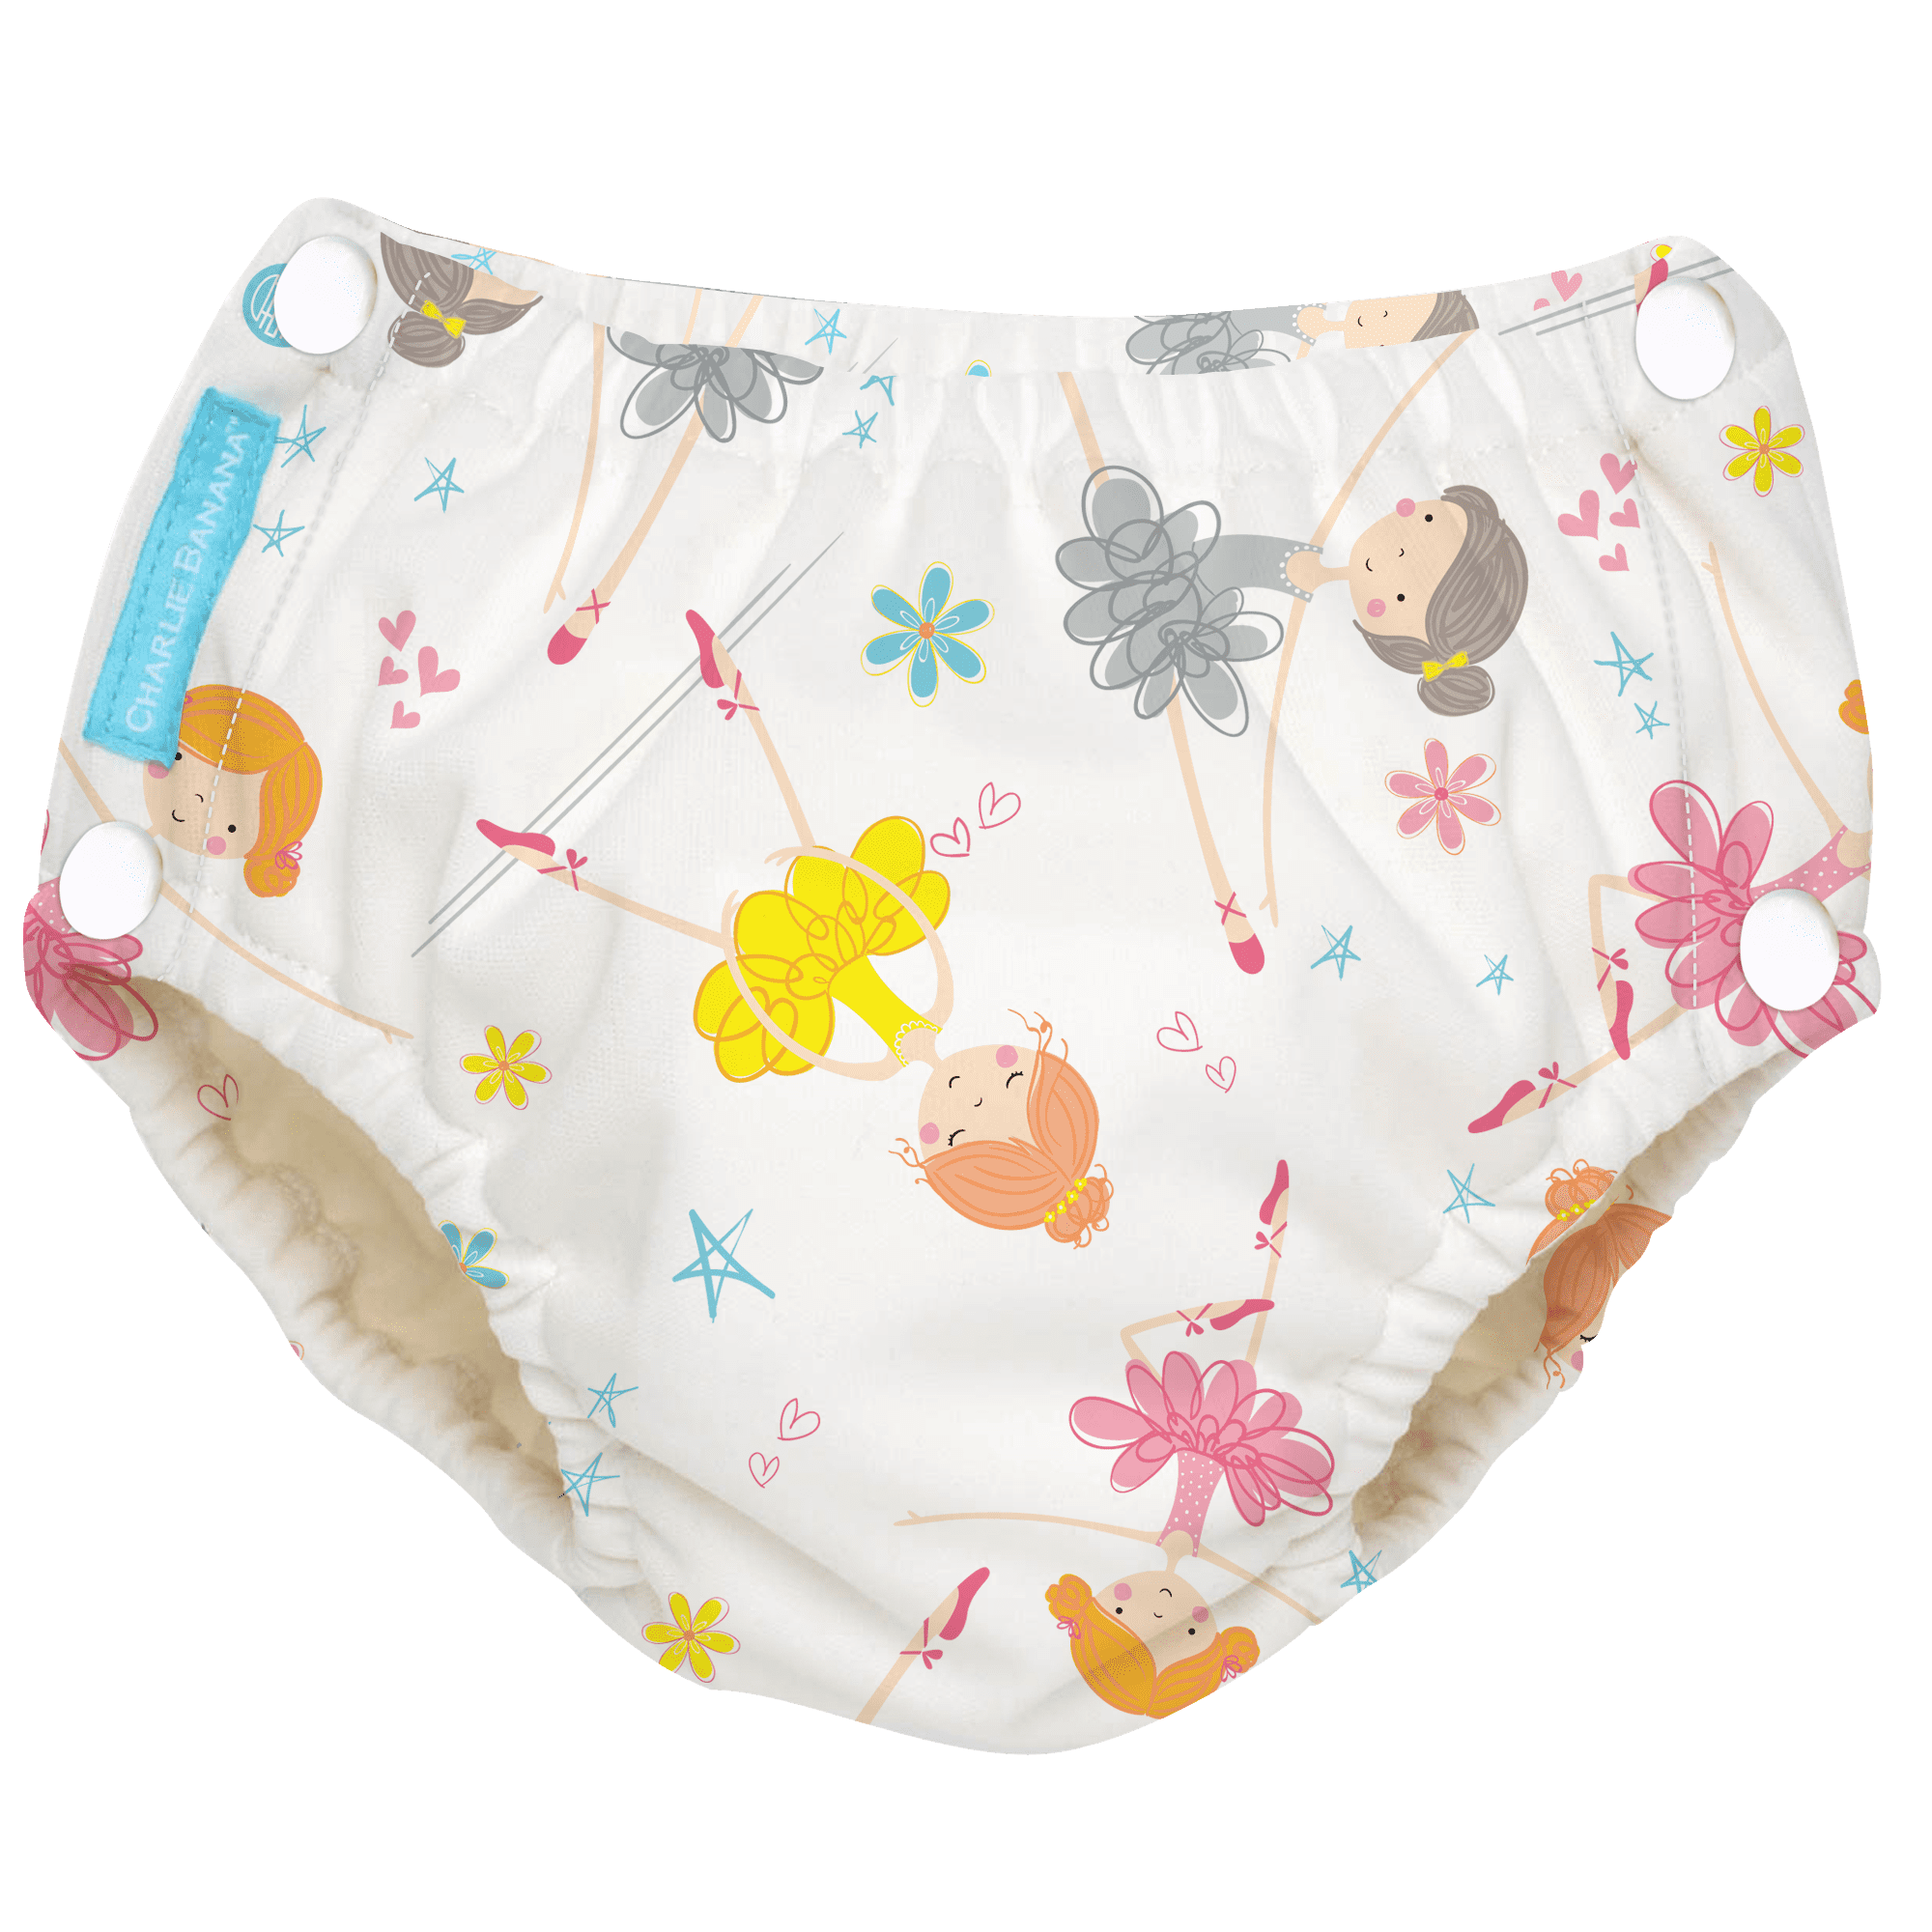 Soccer X-Large Charlie Banana Baby Easy Snaps Reusable and Washable Swim Diaper for Boys or Girls 